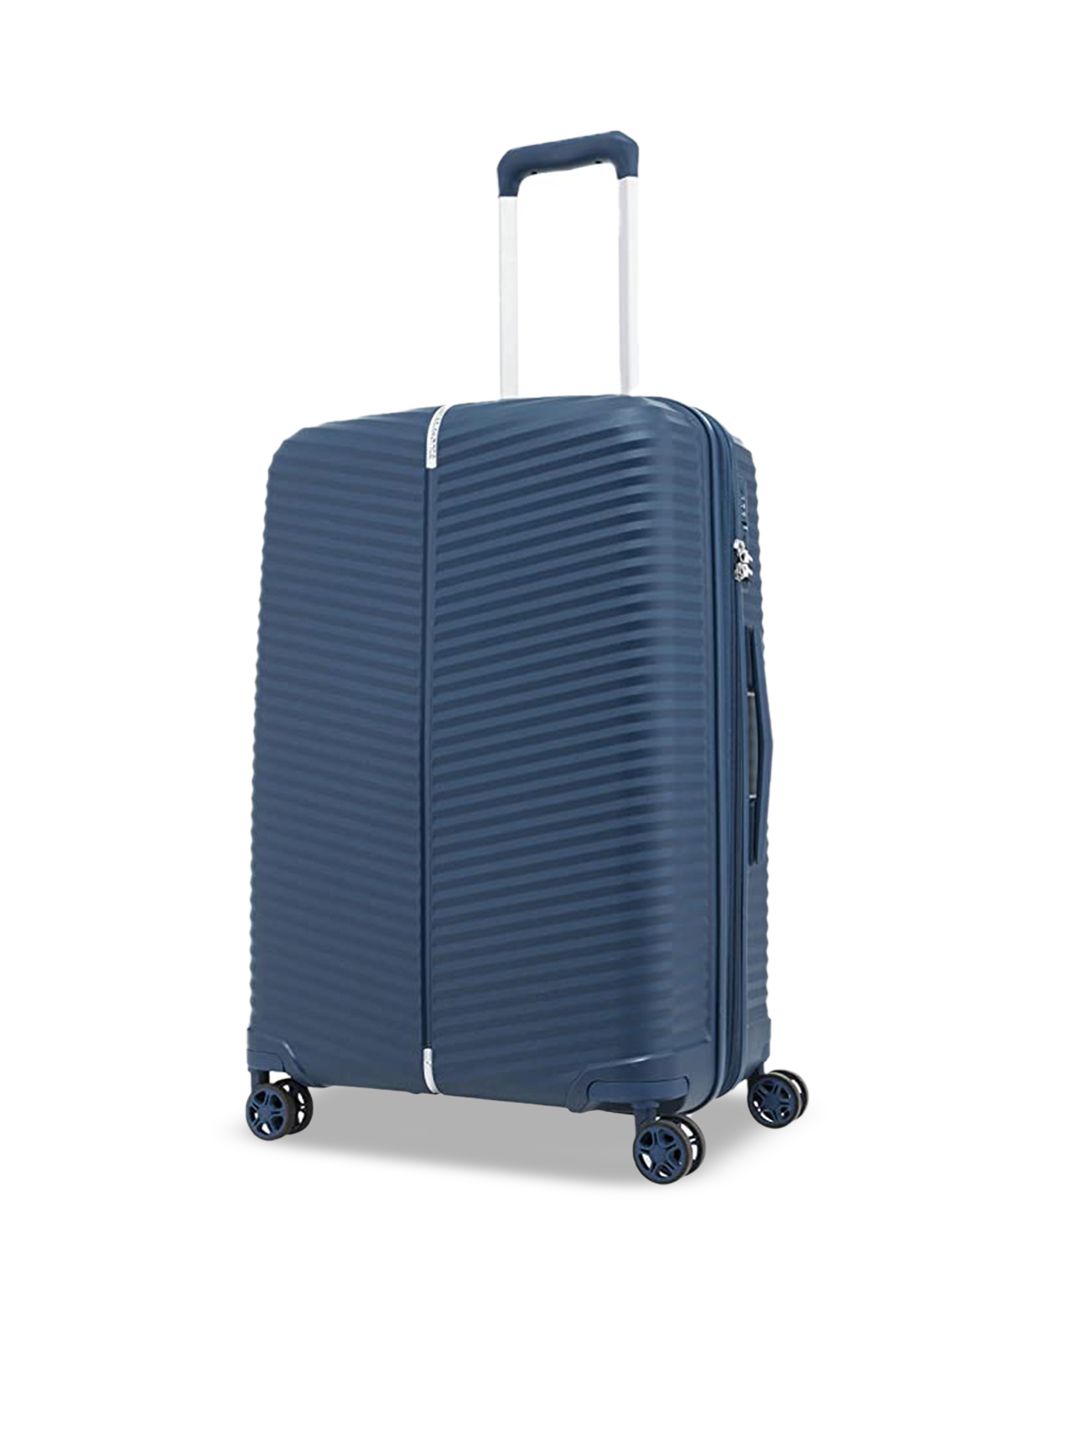 Samsonite Blue Textured Hard-Sided Large Trolley Suitcase Price in India